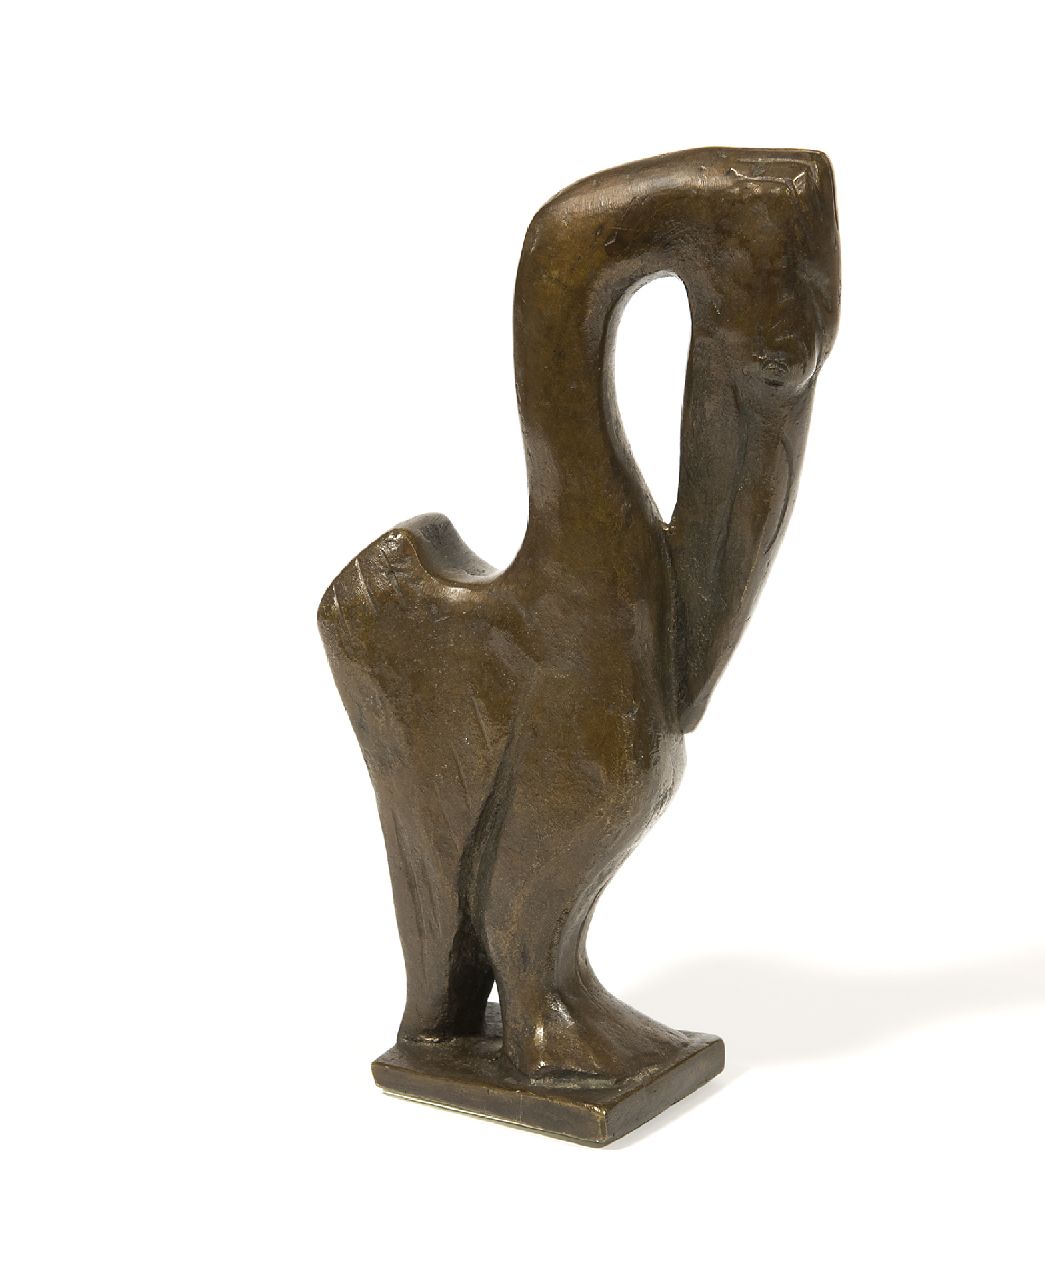 Baisch R.C.  | Rudolf Christian Baisch, Little Pelican I, bronze with a brown patina 16.6 x 8.5 cm, signed with initials on the base